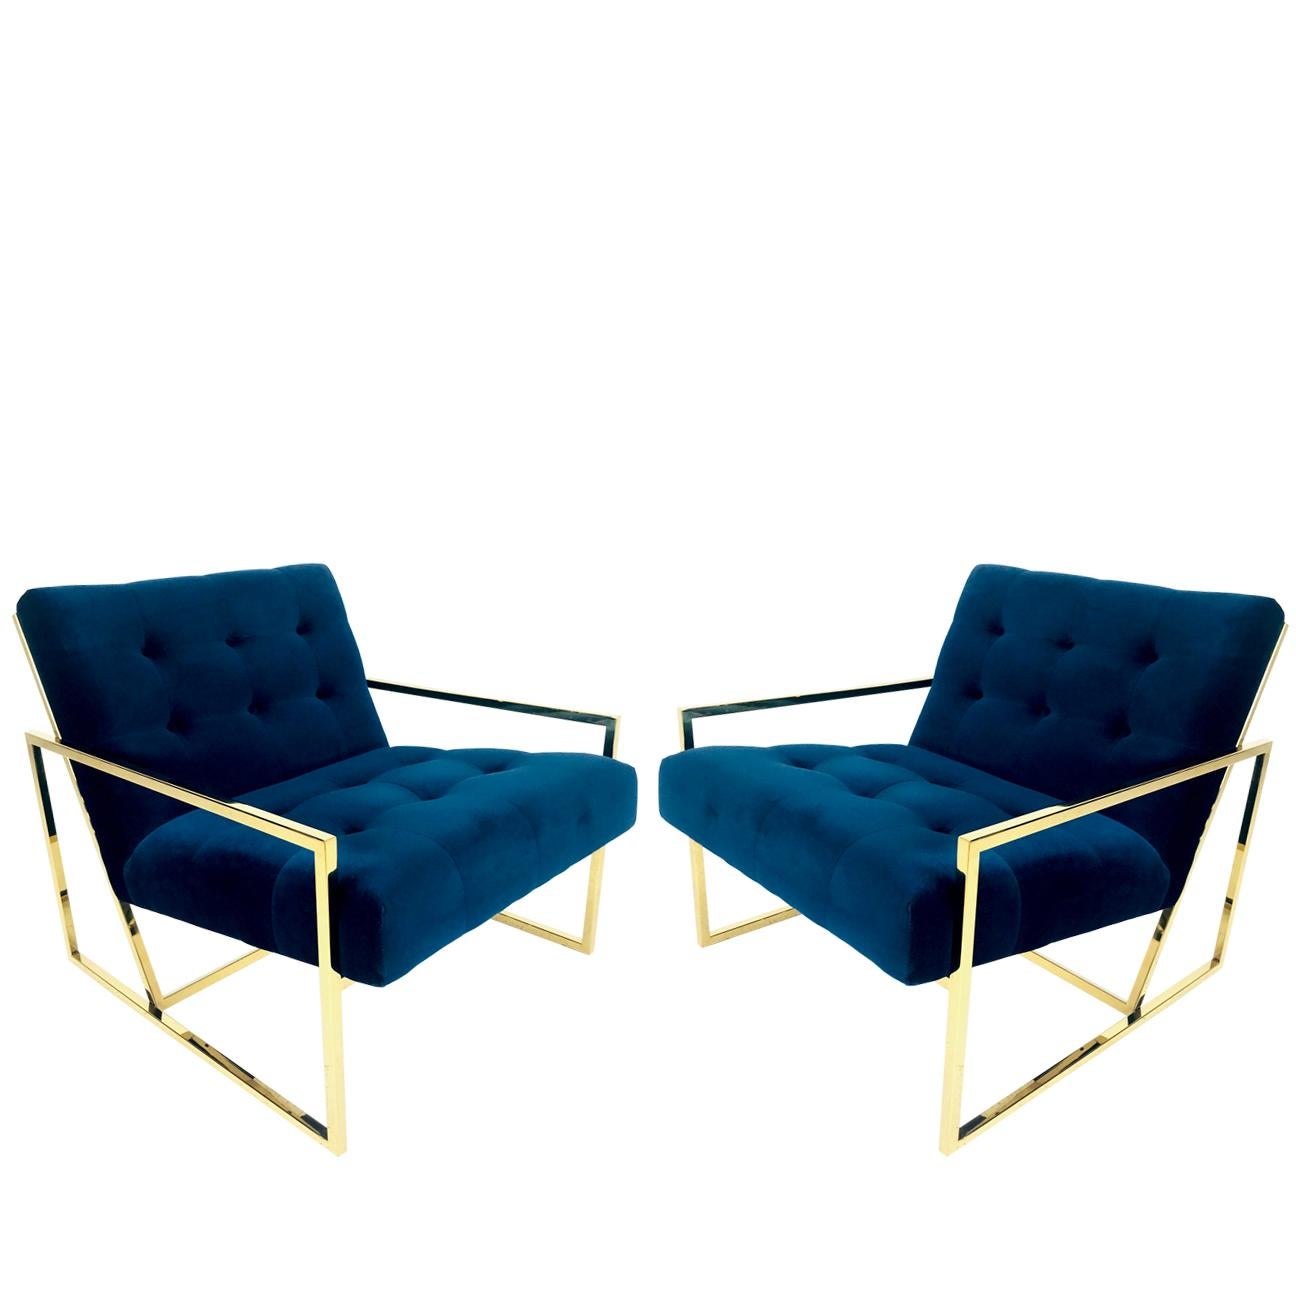 Pair of Goldfinger Lounge Chairs by Jonathan Adler